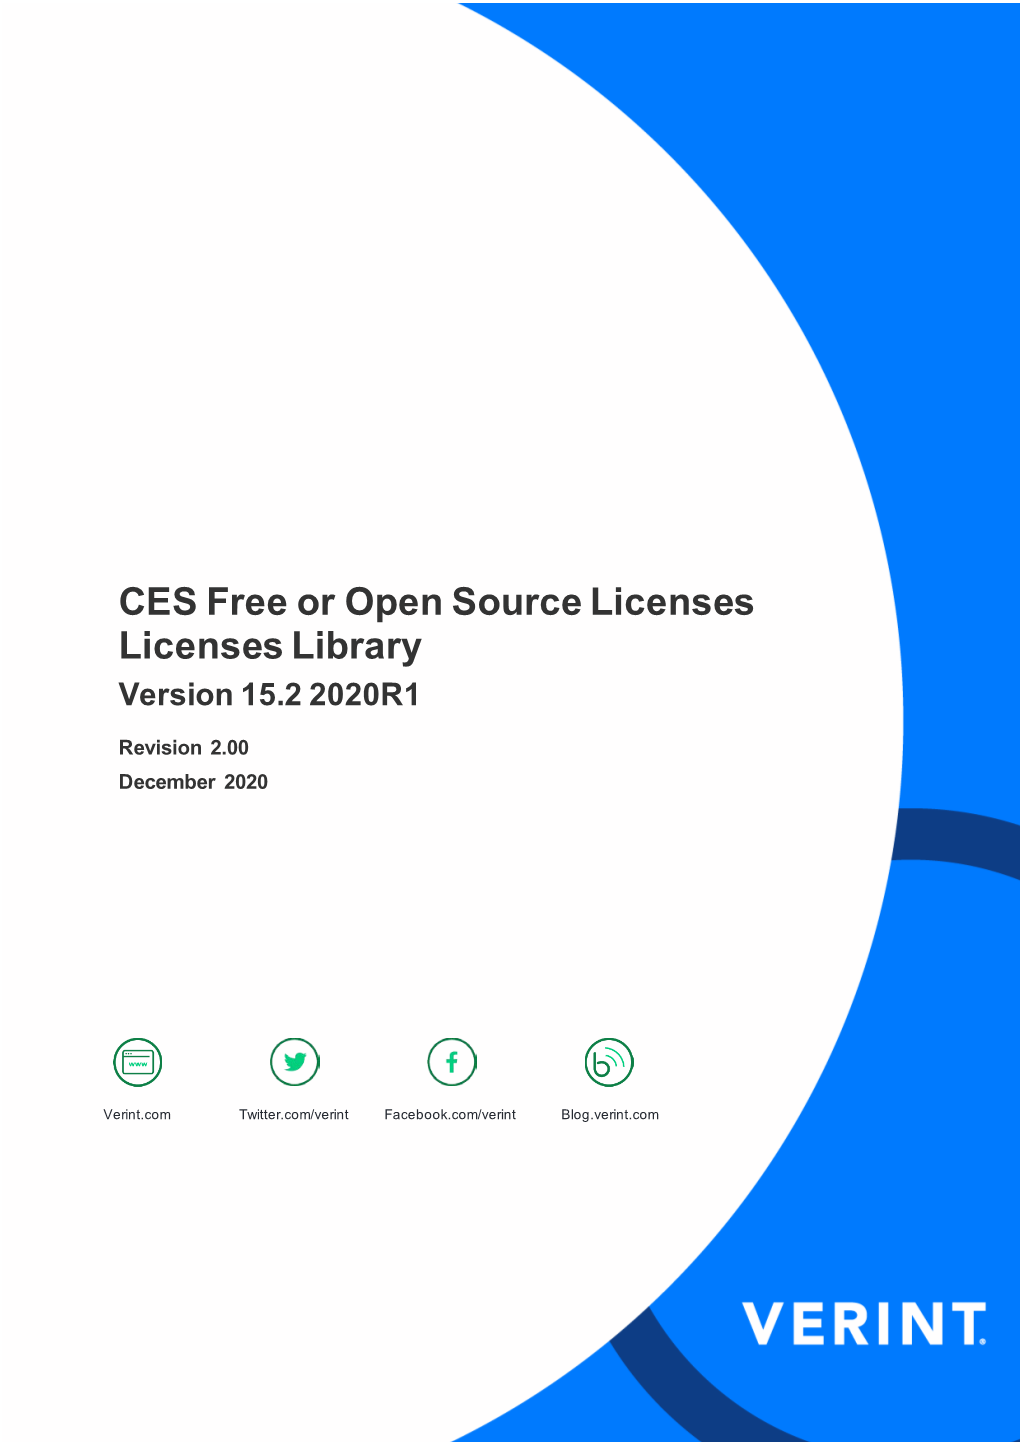 CES Free Or Open Source Licenses Licenses Library Version 15.2 2020R1